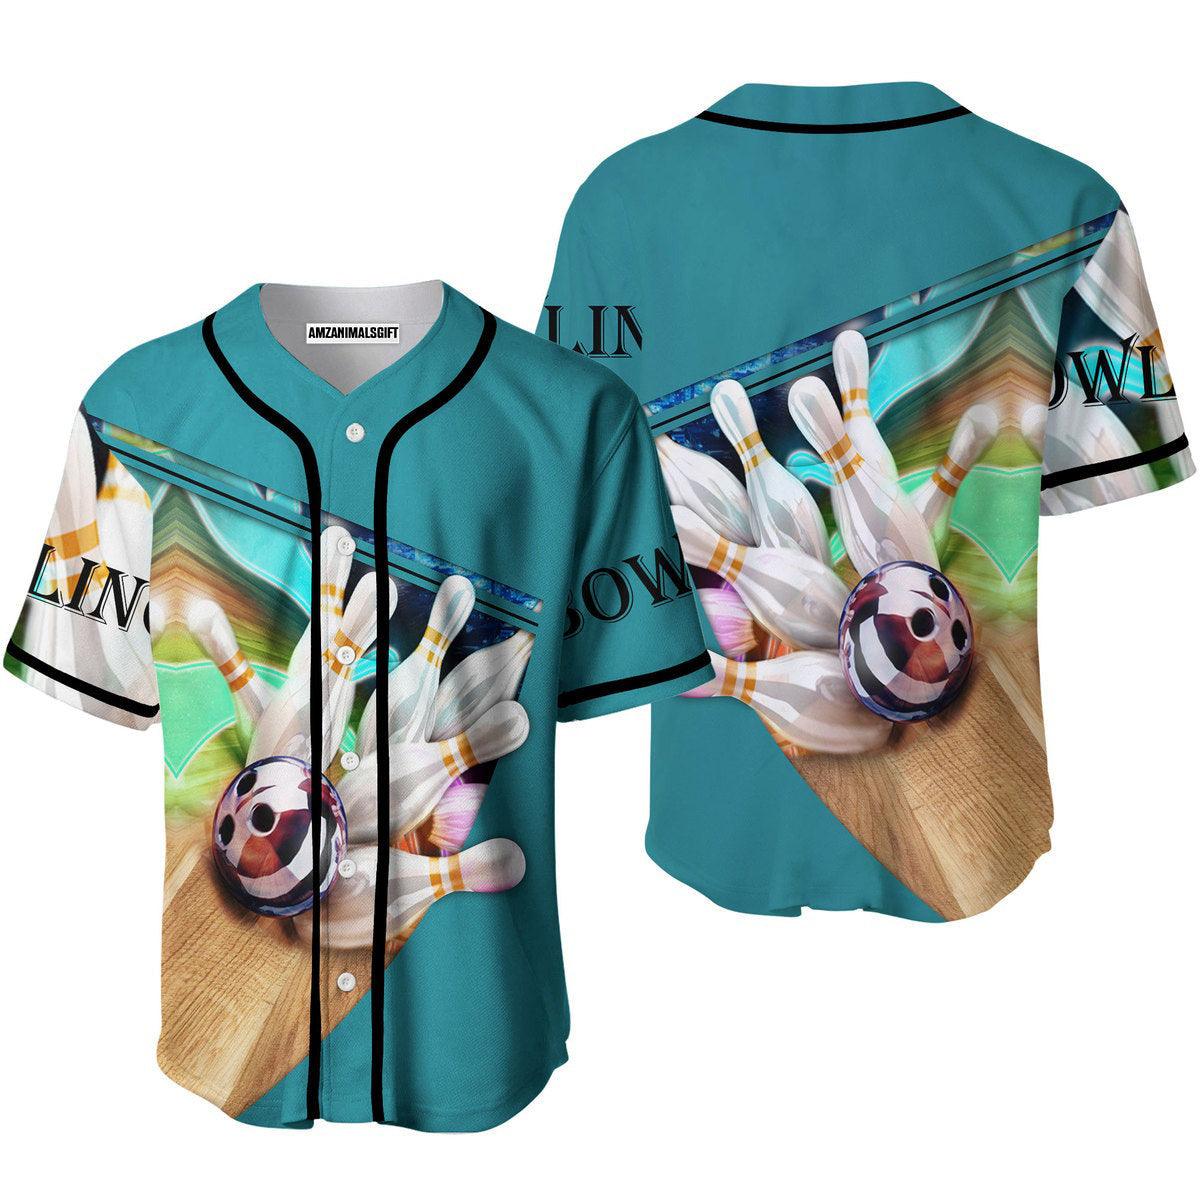 Bowling Baseball Jersey, Bowling and Pins Baseball Jersey For Men And Women - Perfect Gift For Bowling Lovers, Bowlers - Amzanimalsgift